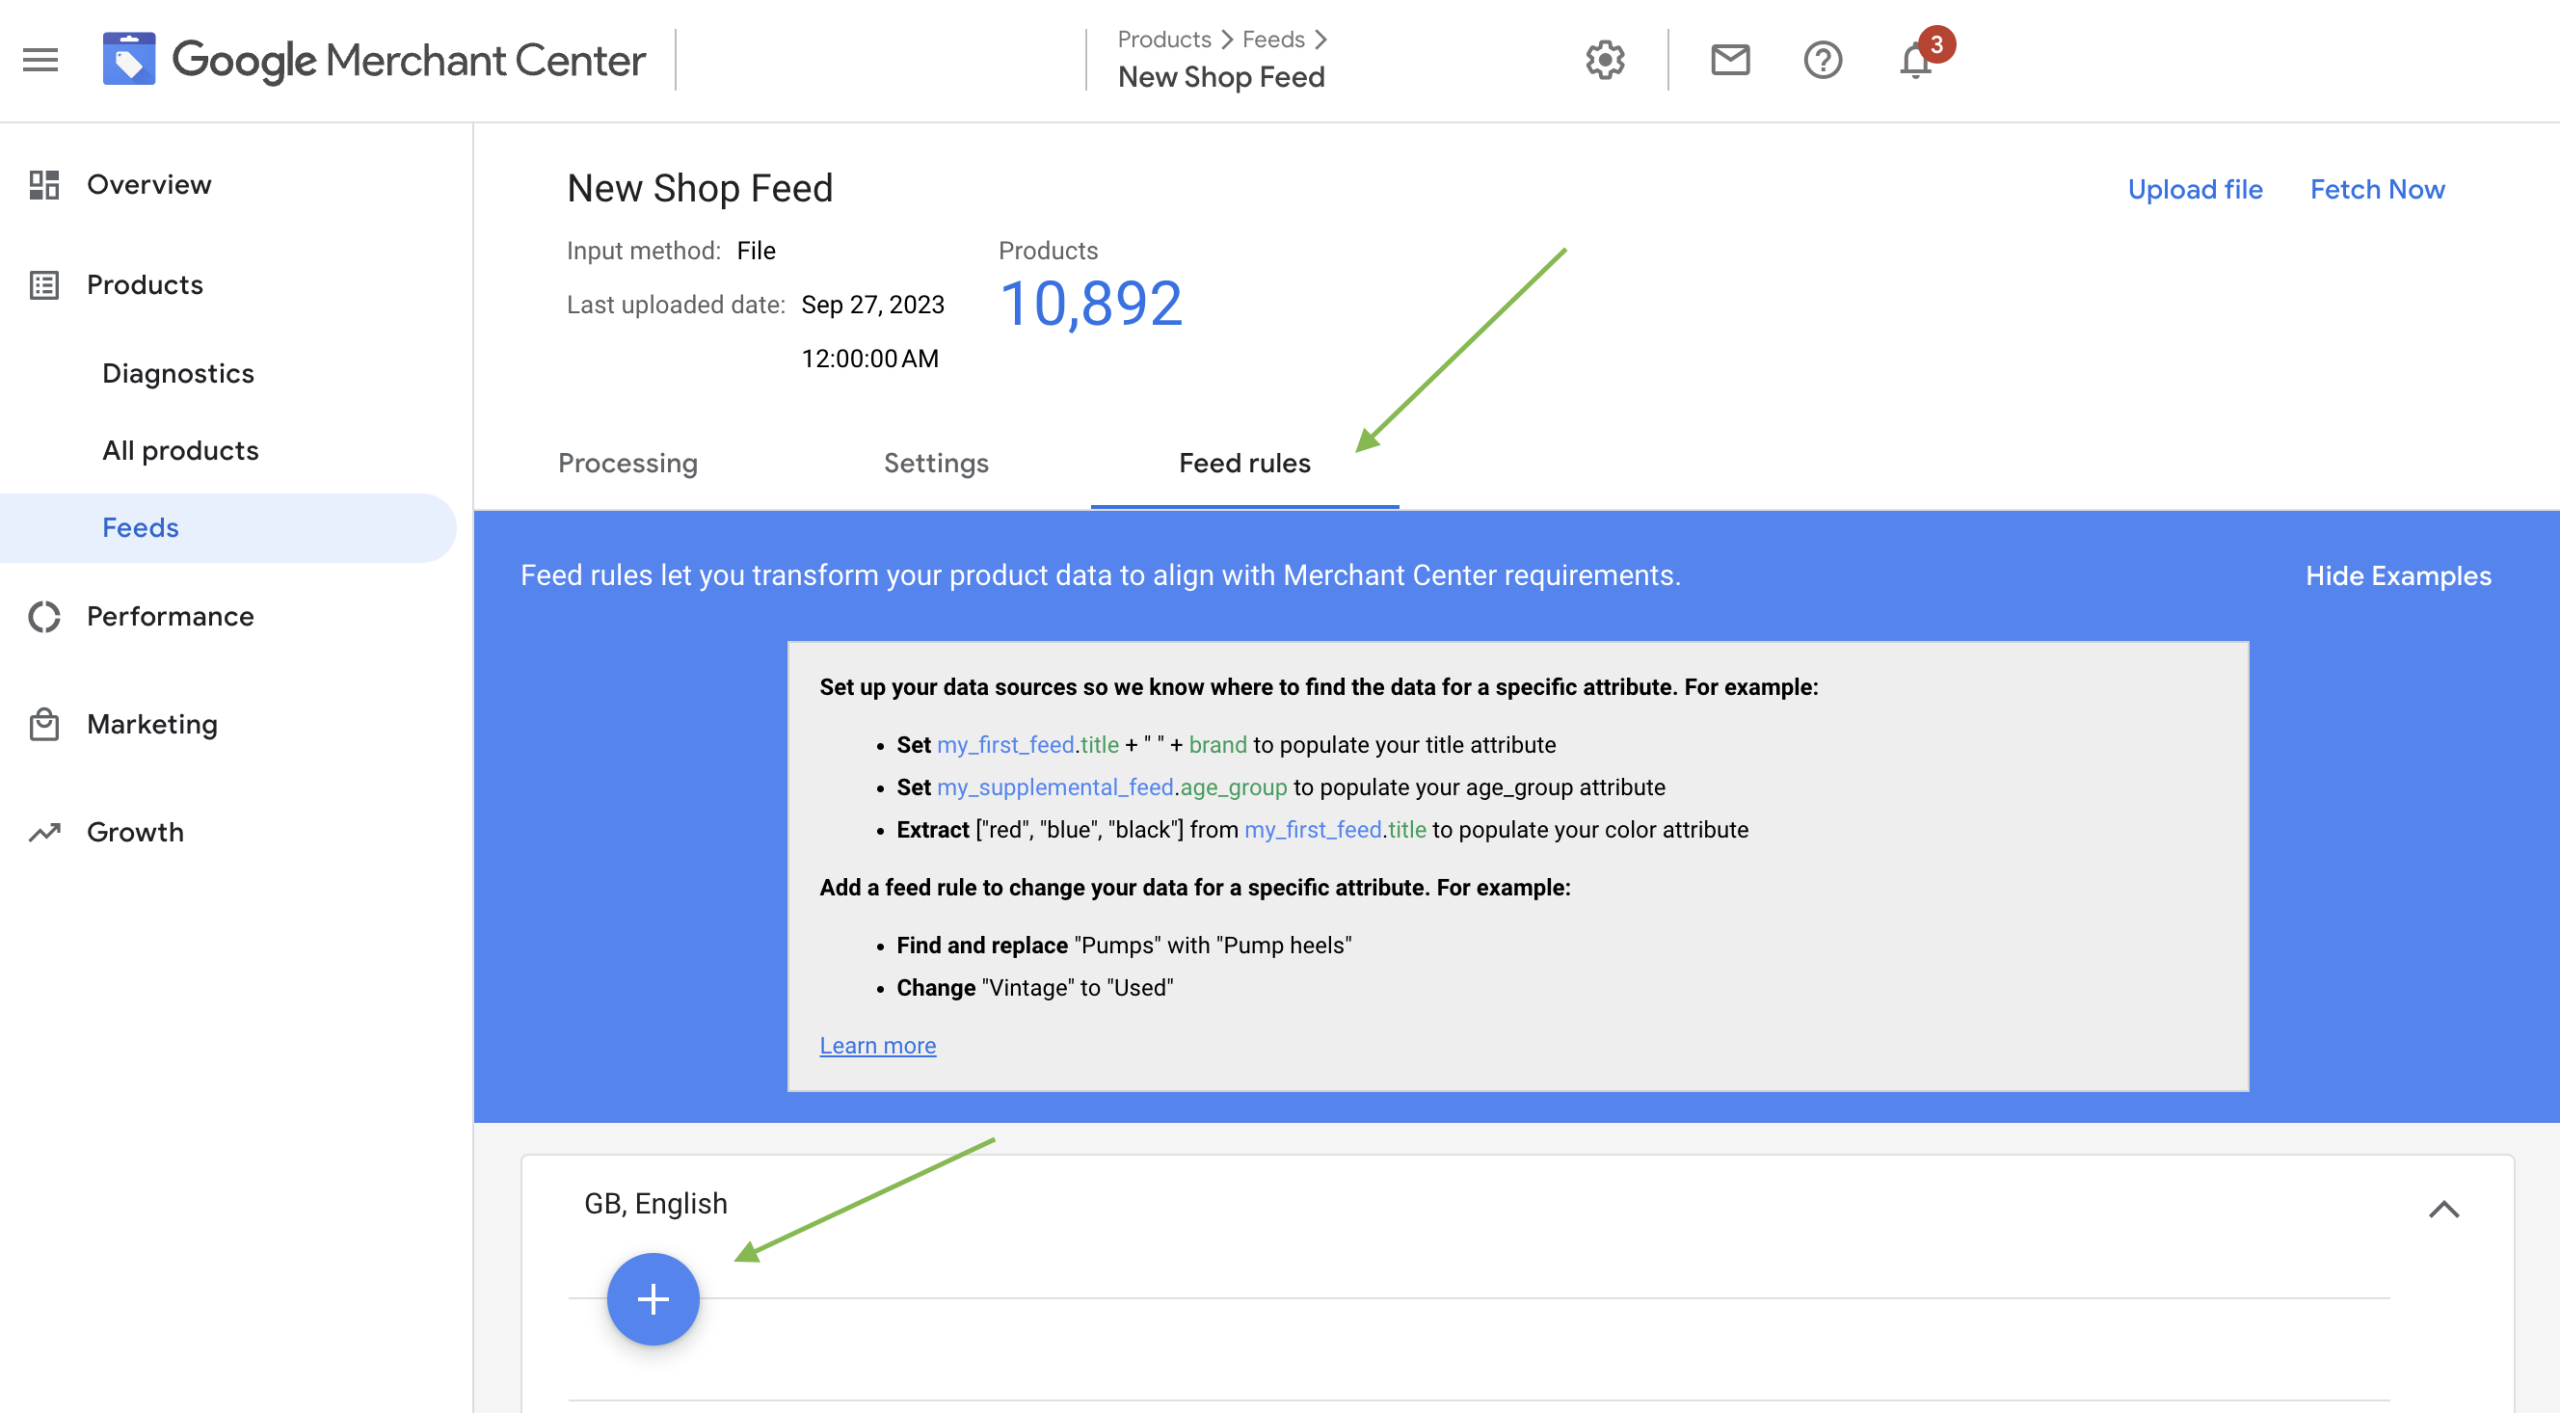 Screenshot of where to create a feed rule in the Google Merchant Center interface